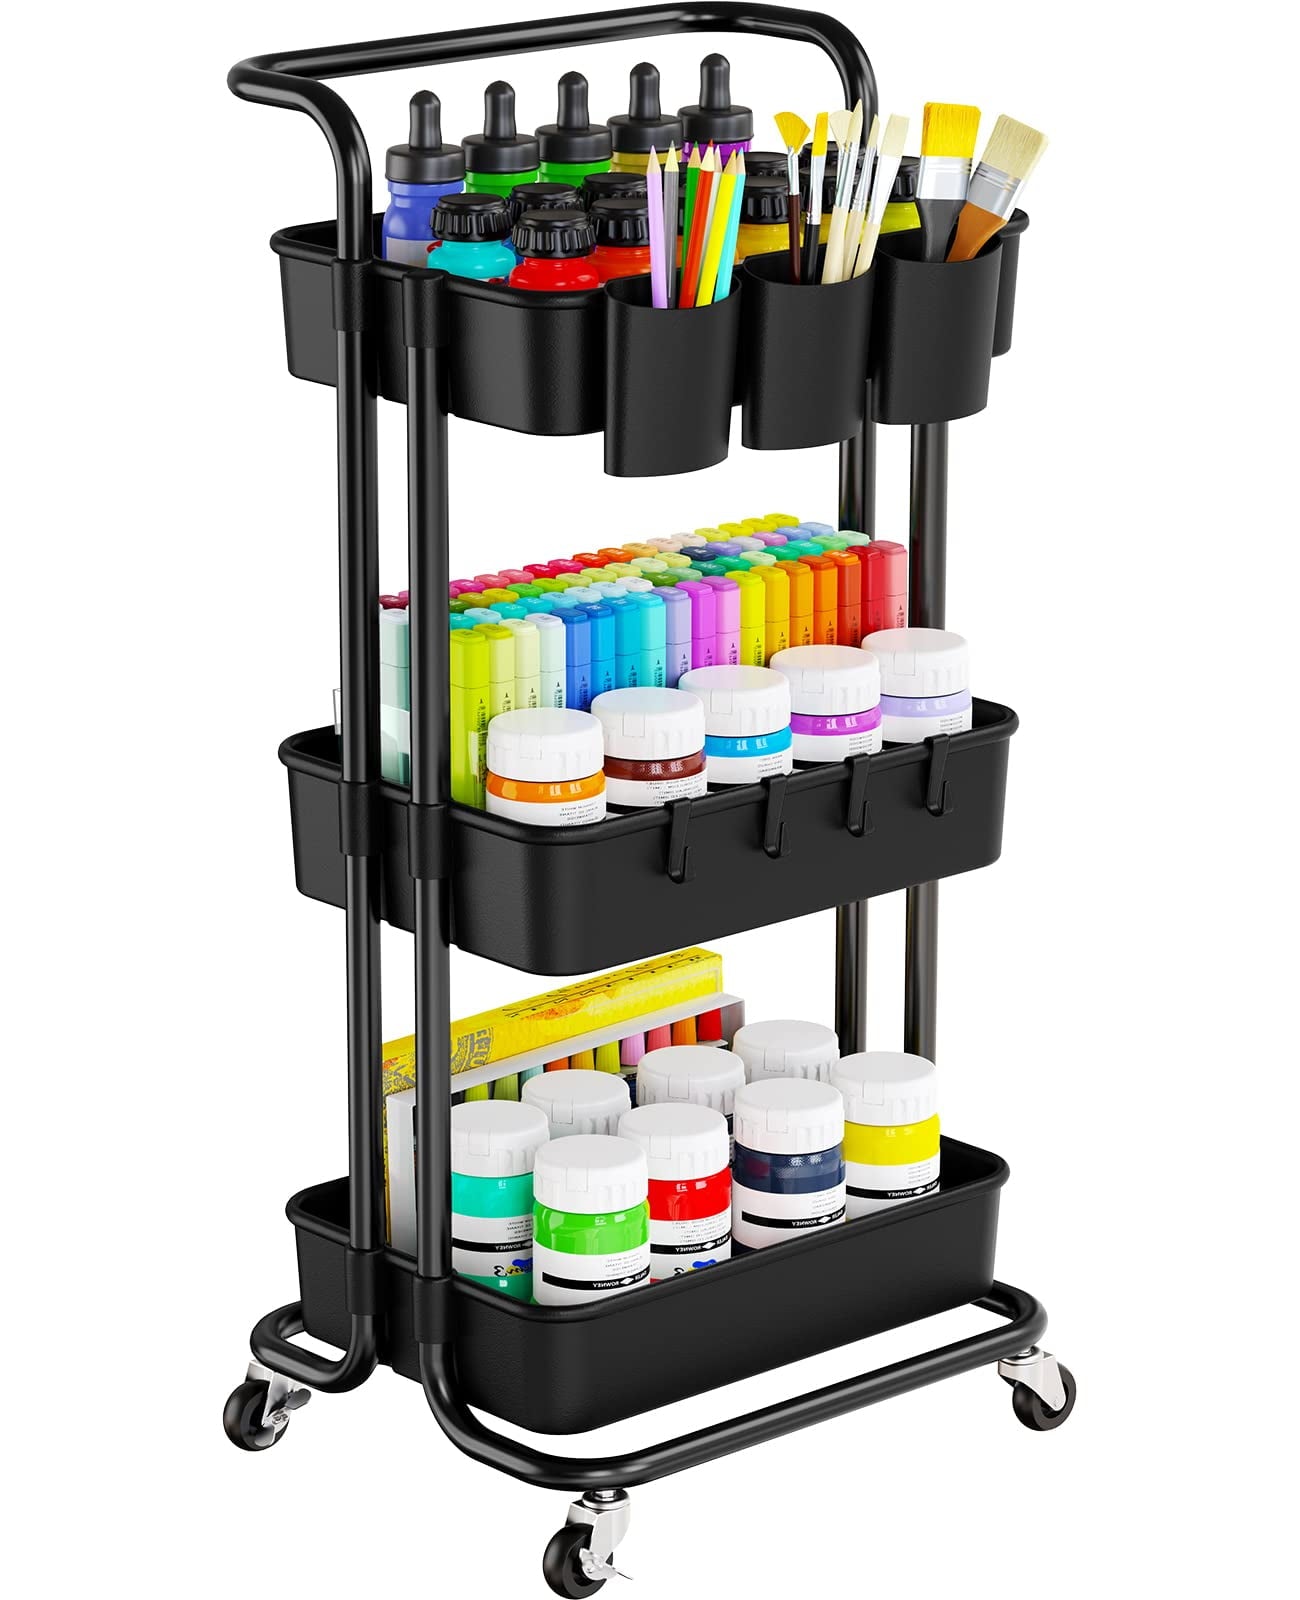 3-Tier Metal Rolling Cart Utility Cart Storage Cart with Lockable Wheels, 3 Hanging Cups & 4 Hooks for Office, Kitchen, Black